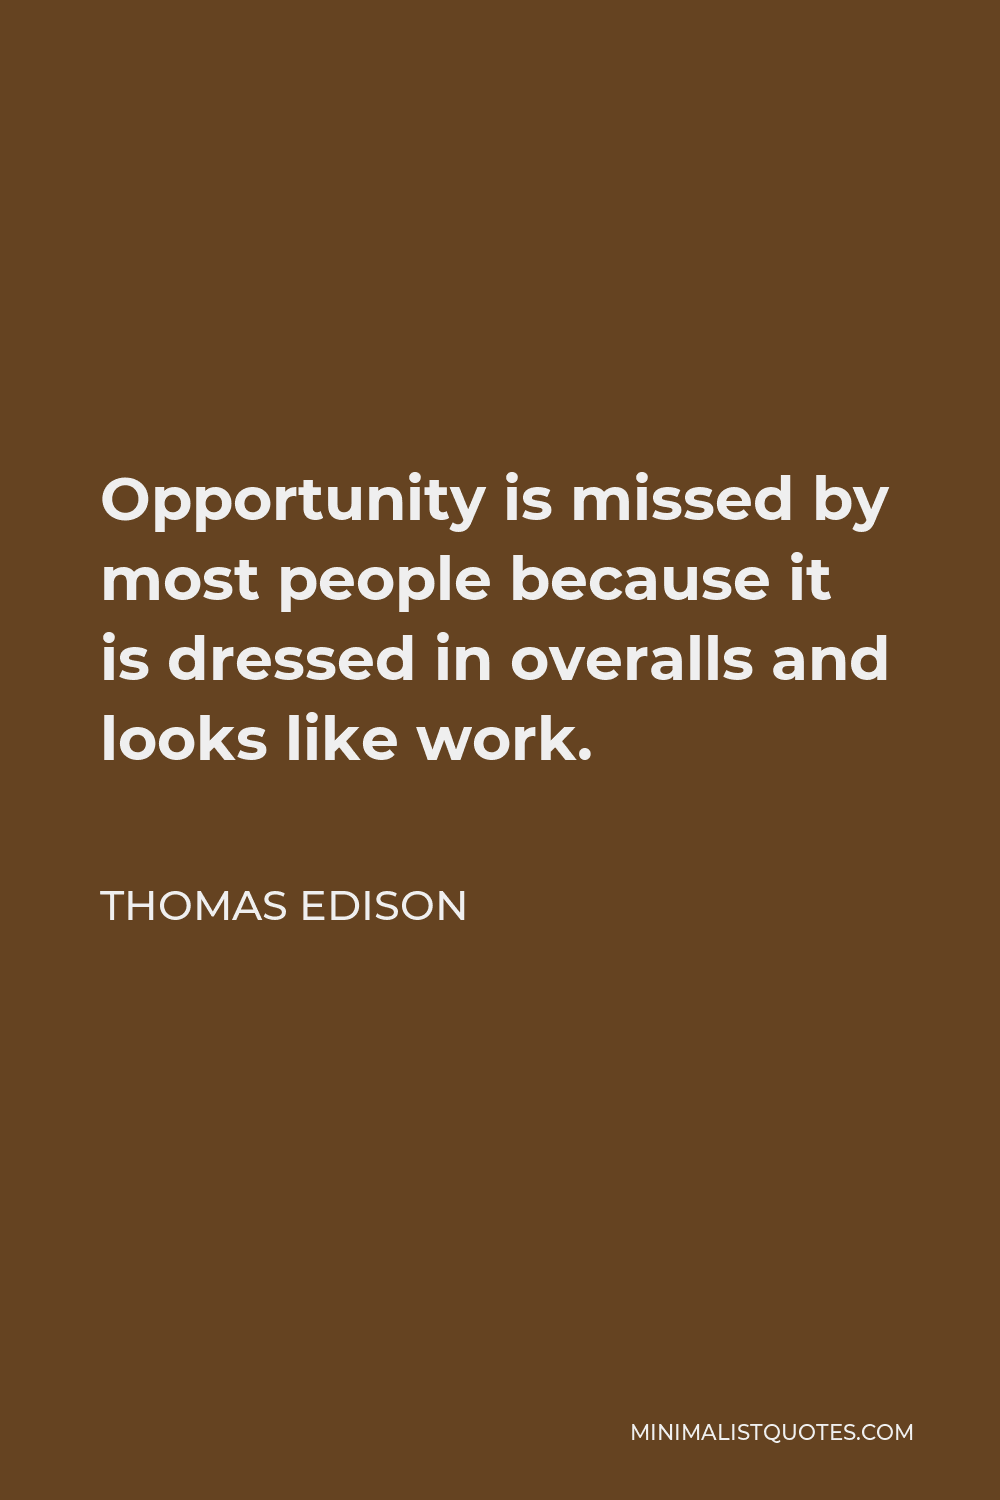 Opportunity is Missed By Most People Thomas Edison Wall Decal Vinyl Art IN38 